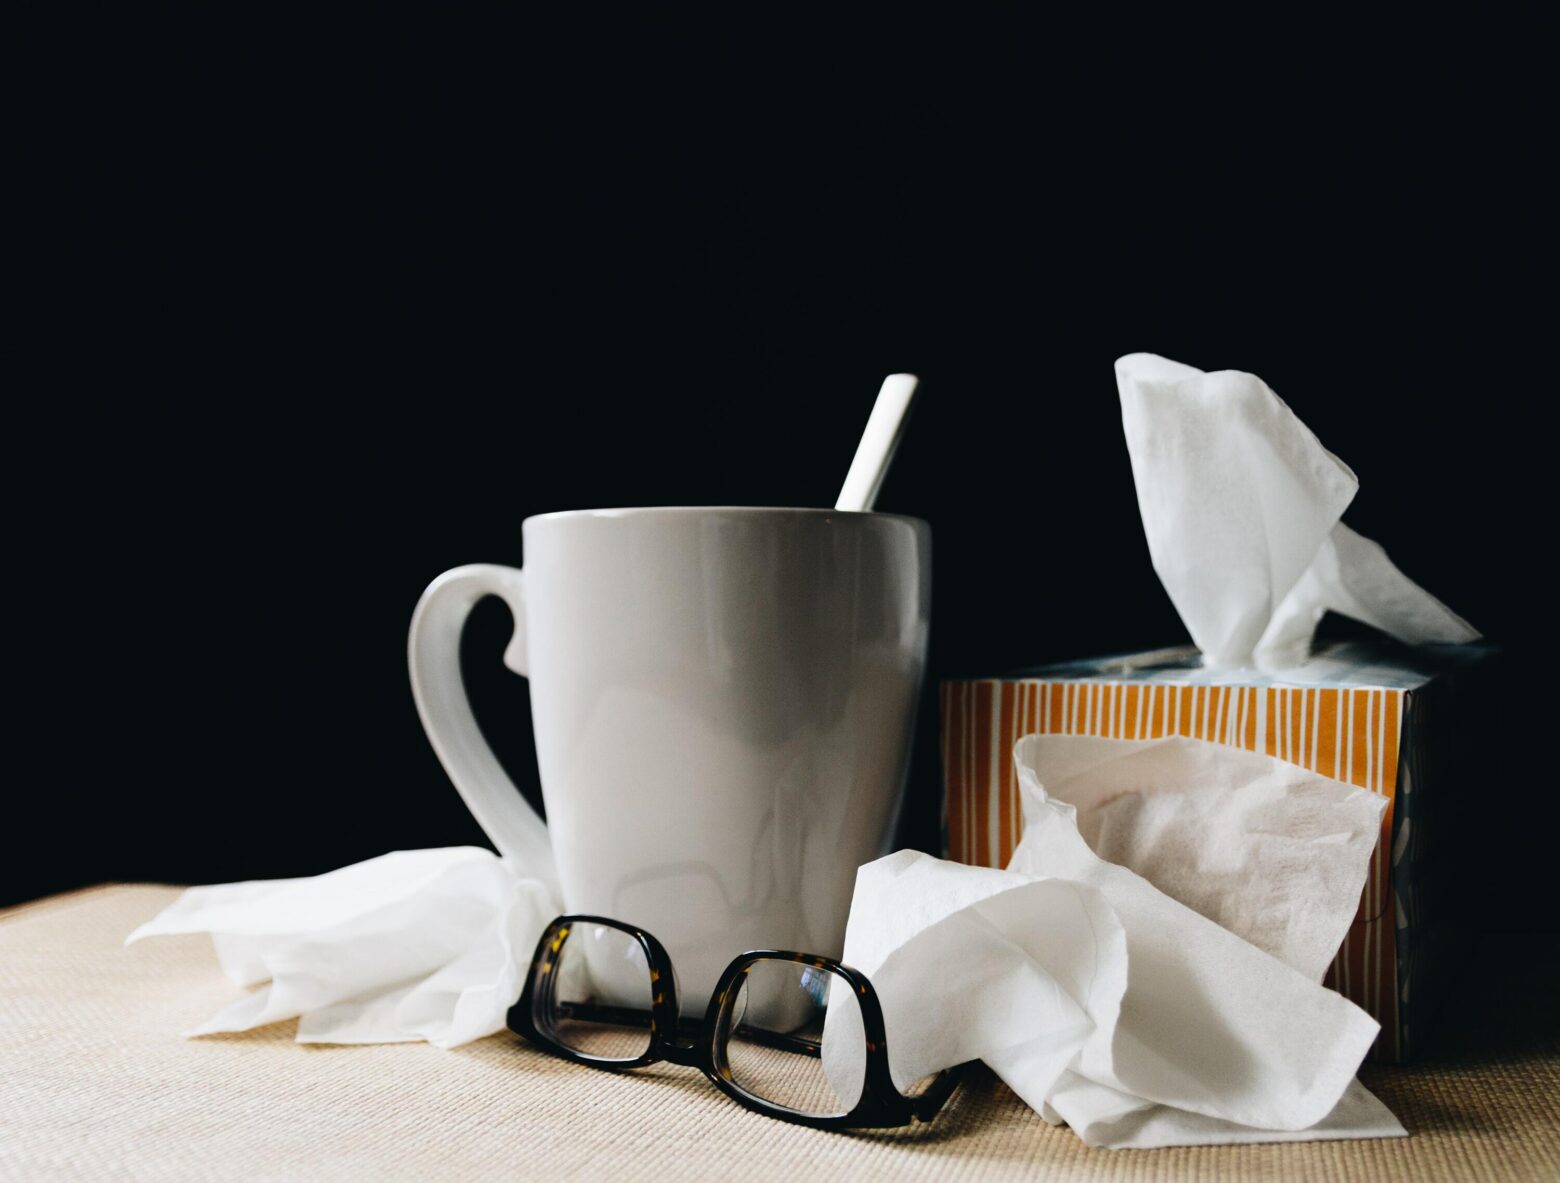 A box of tissues, a hot drink and a pair of reading glasses.